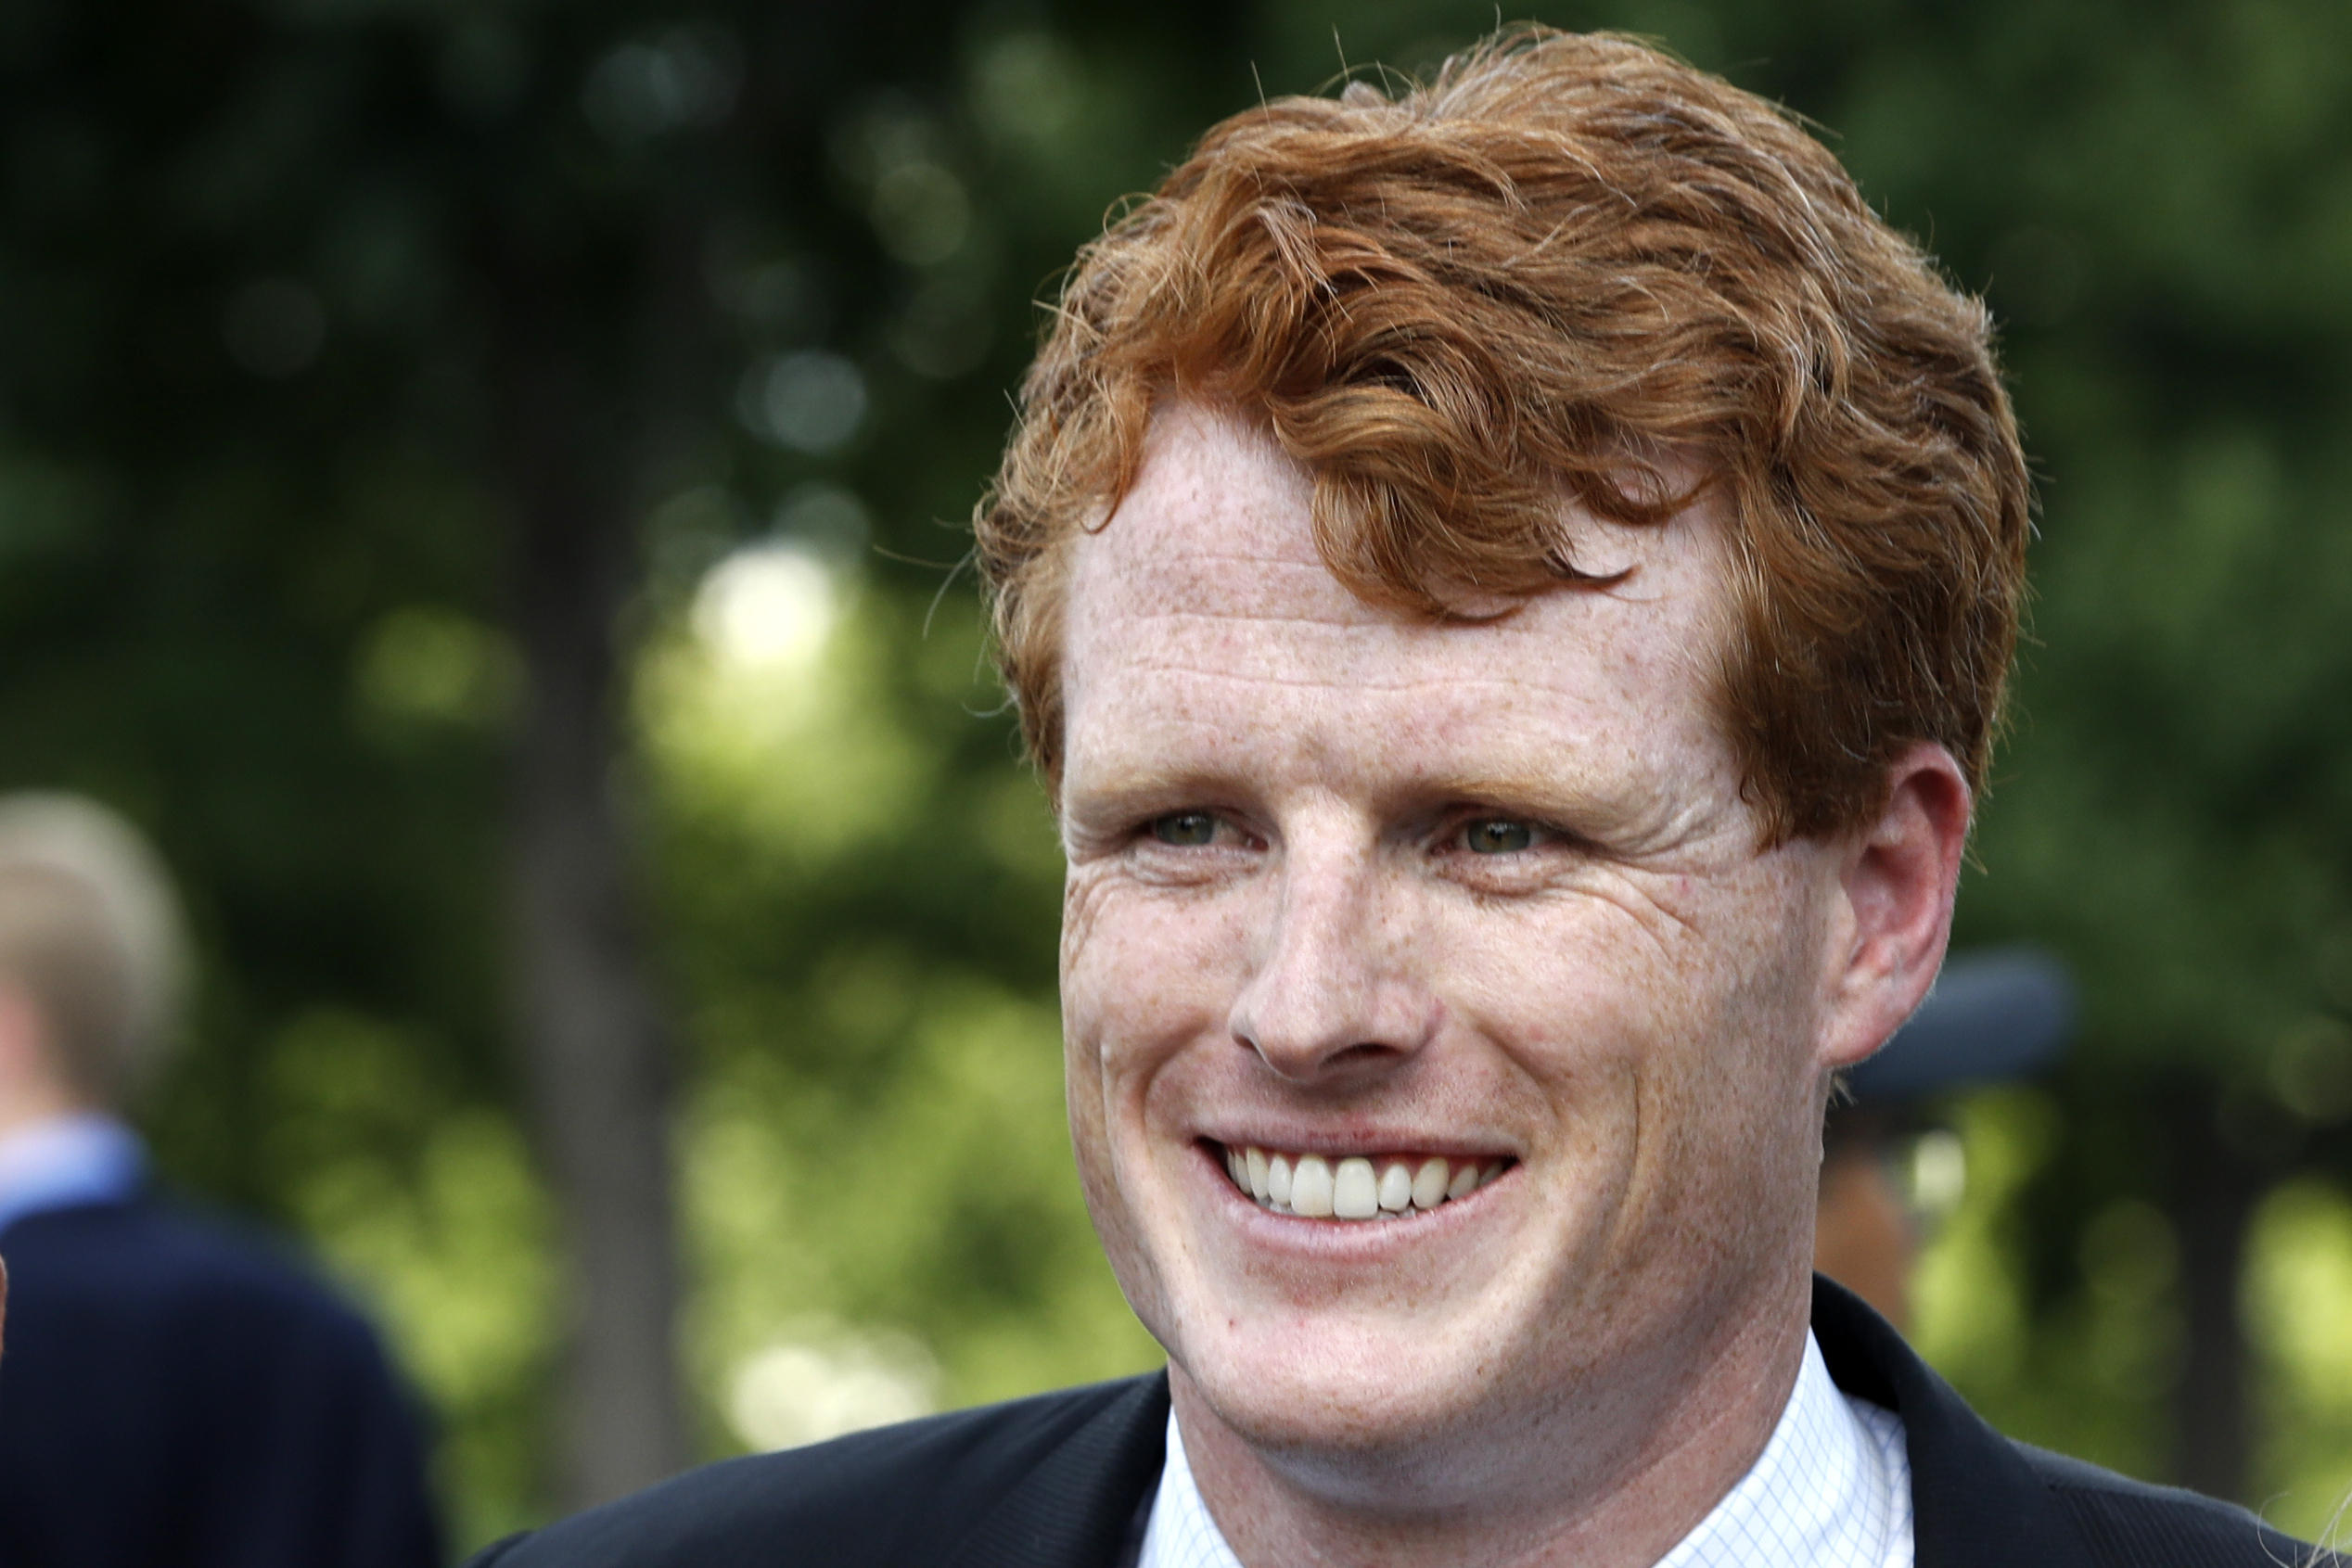 Rep. Joe Kennedy III to deliver Democratic response to State of the